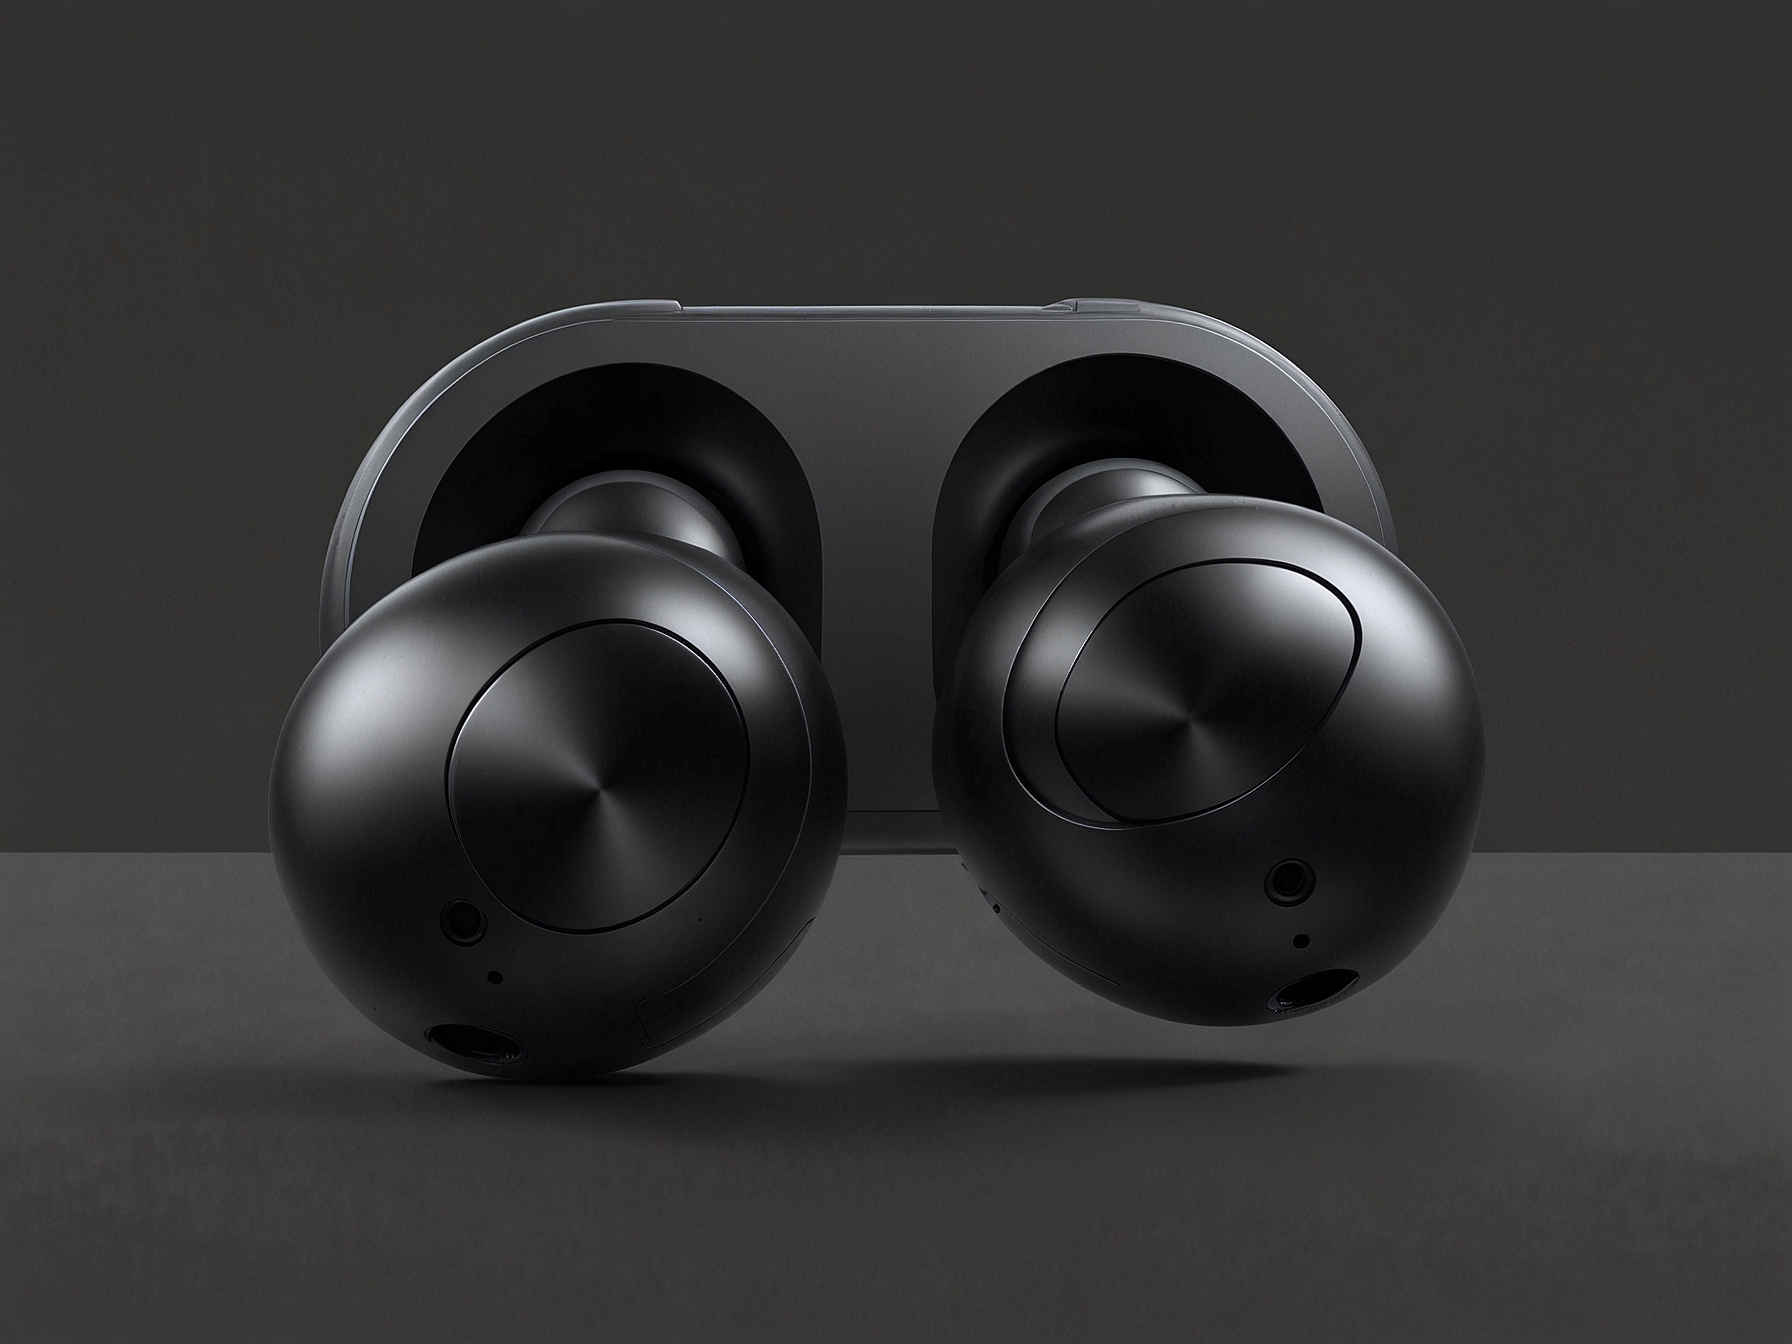 Close-up of Samsung Galaxy Buds 3 Pro in their sleek, ergonomic design, highlighting features like active noise cancellation, improved sound quality, and longer battery life.